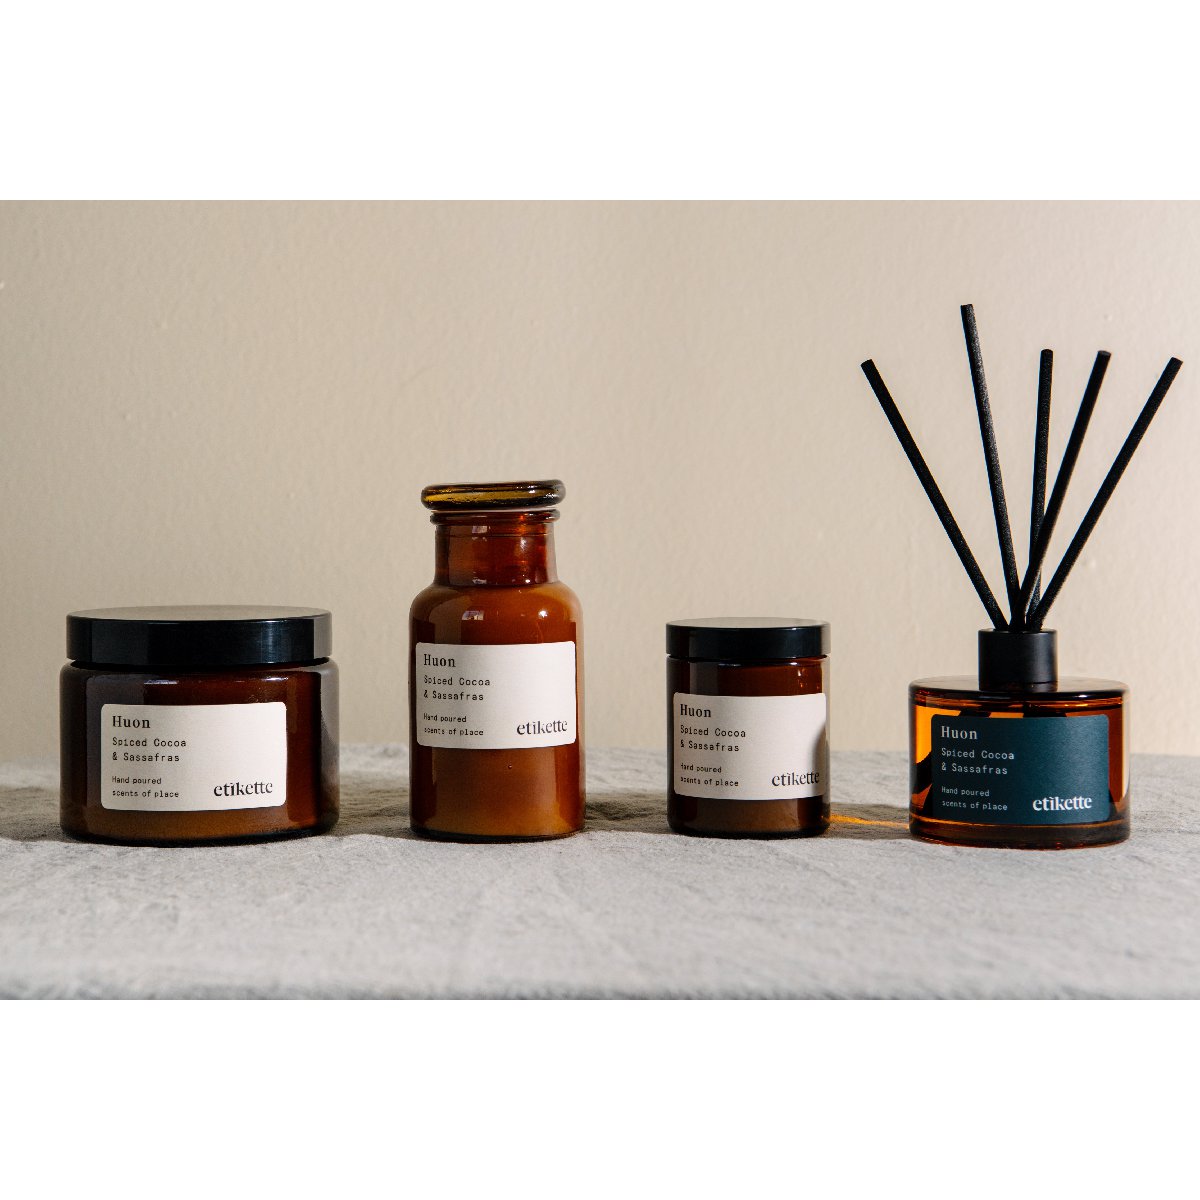 Etikette soy candle | Huon spiced cocoa sassafras collection